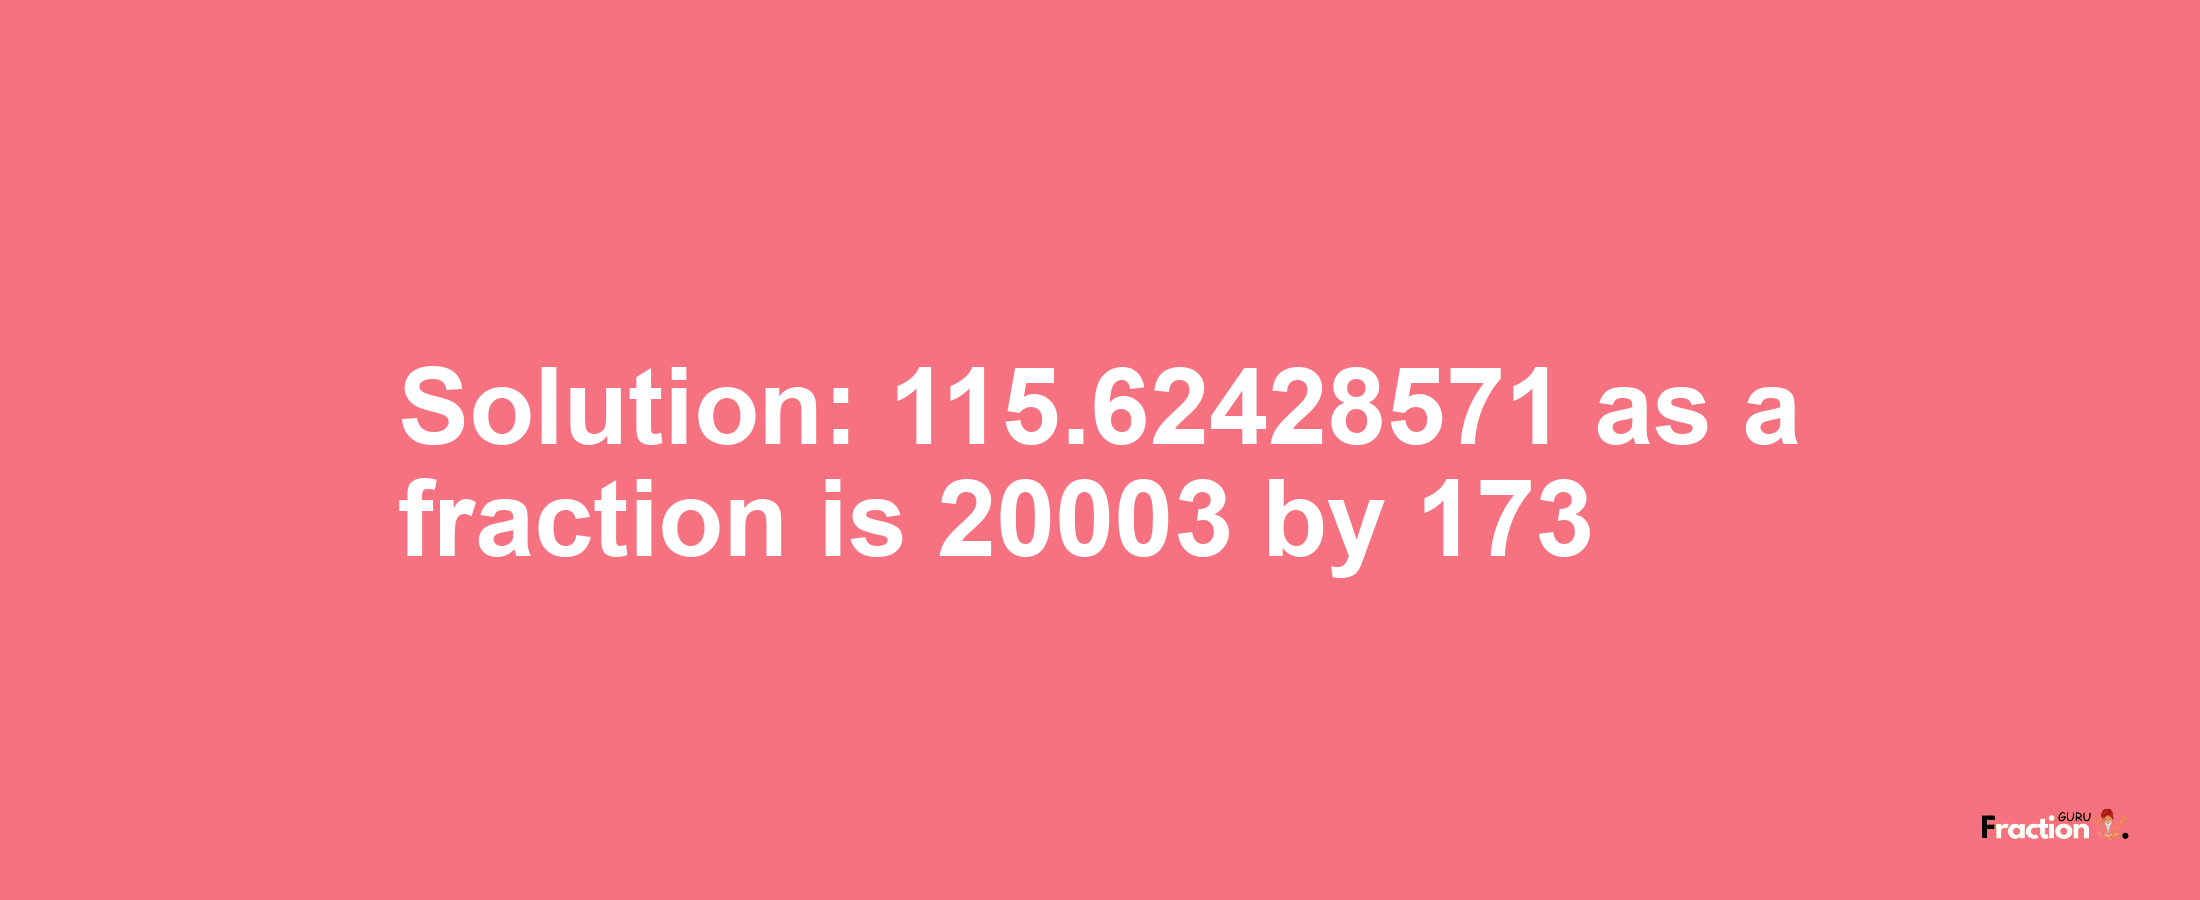 Solution:115.62428571 as a fraction is 20003/173